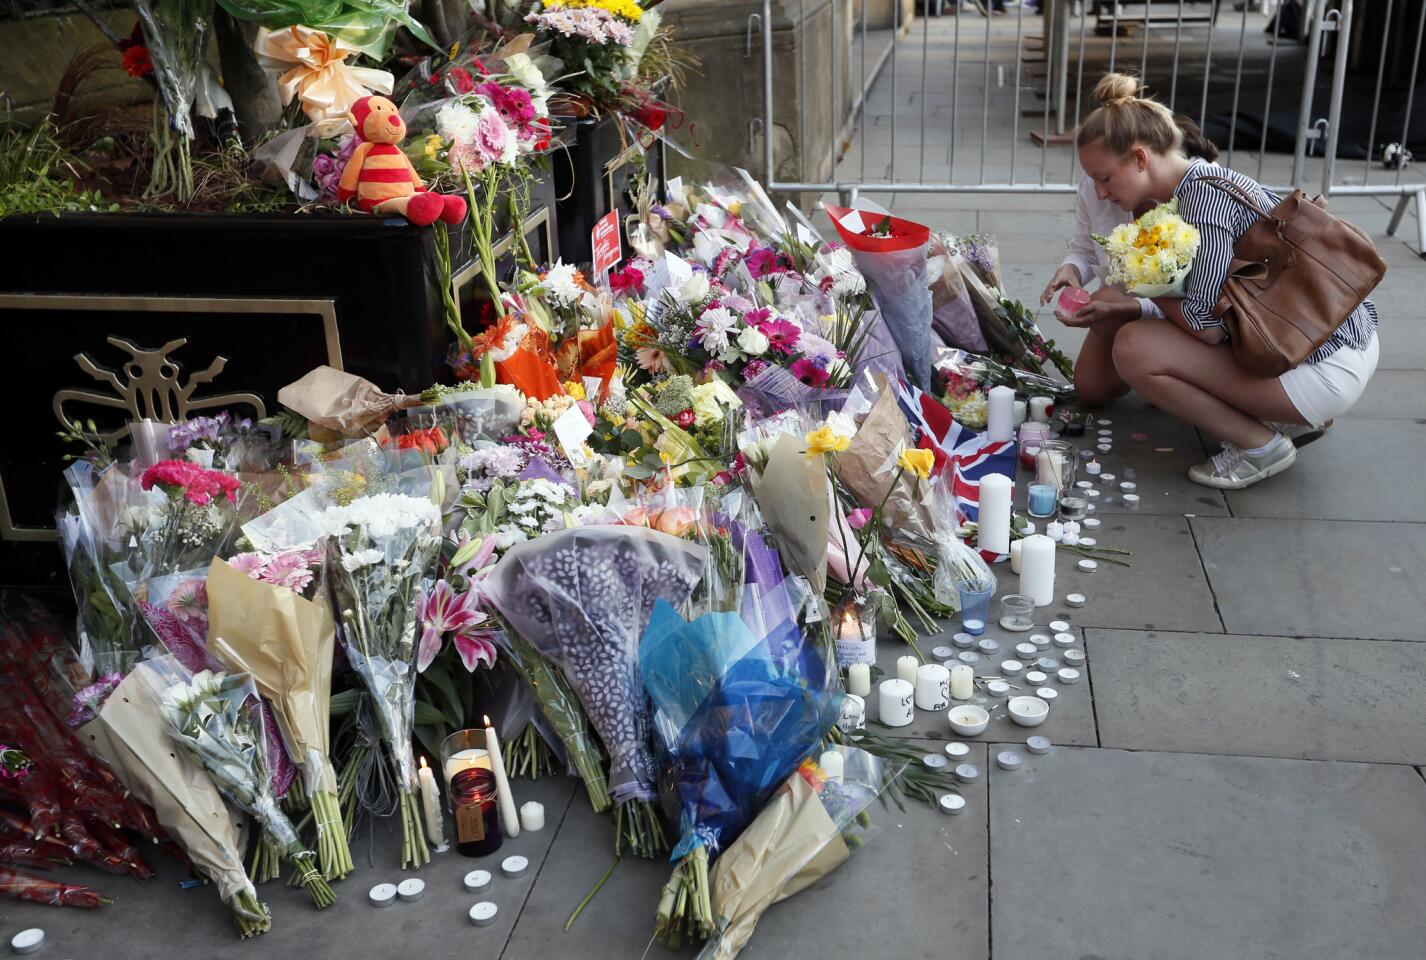 People lay flowers after a vigil in Manchester, England, on May 23, 2017, the day after a suicide attack at an Ariana Grande concert left 22 people dead.